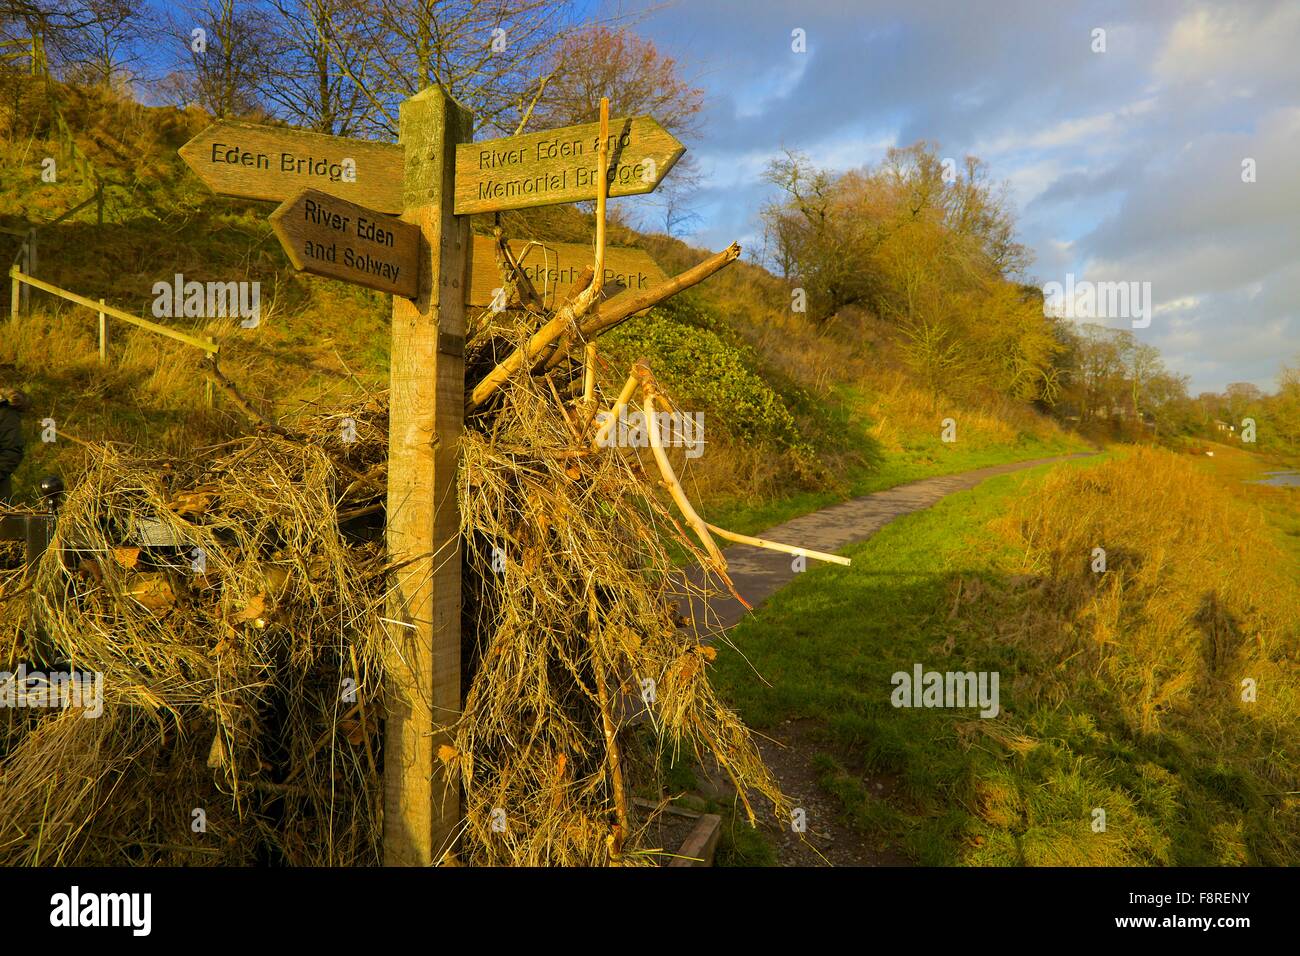 Aftermath of Carlisle Floods. 6th December 2015. Foot path sign showing flotsam illustrating height of flooded River Eden caused by Storm Desmond. Carlisle, Cumbria, England, UK. Stock Photo